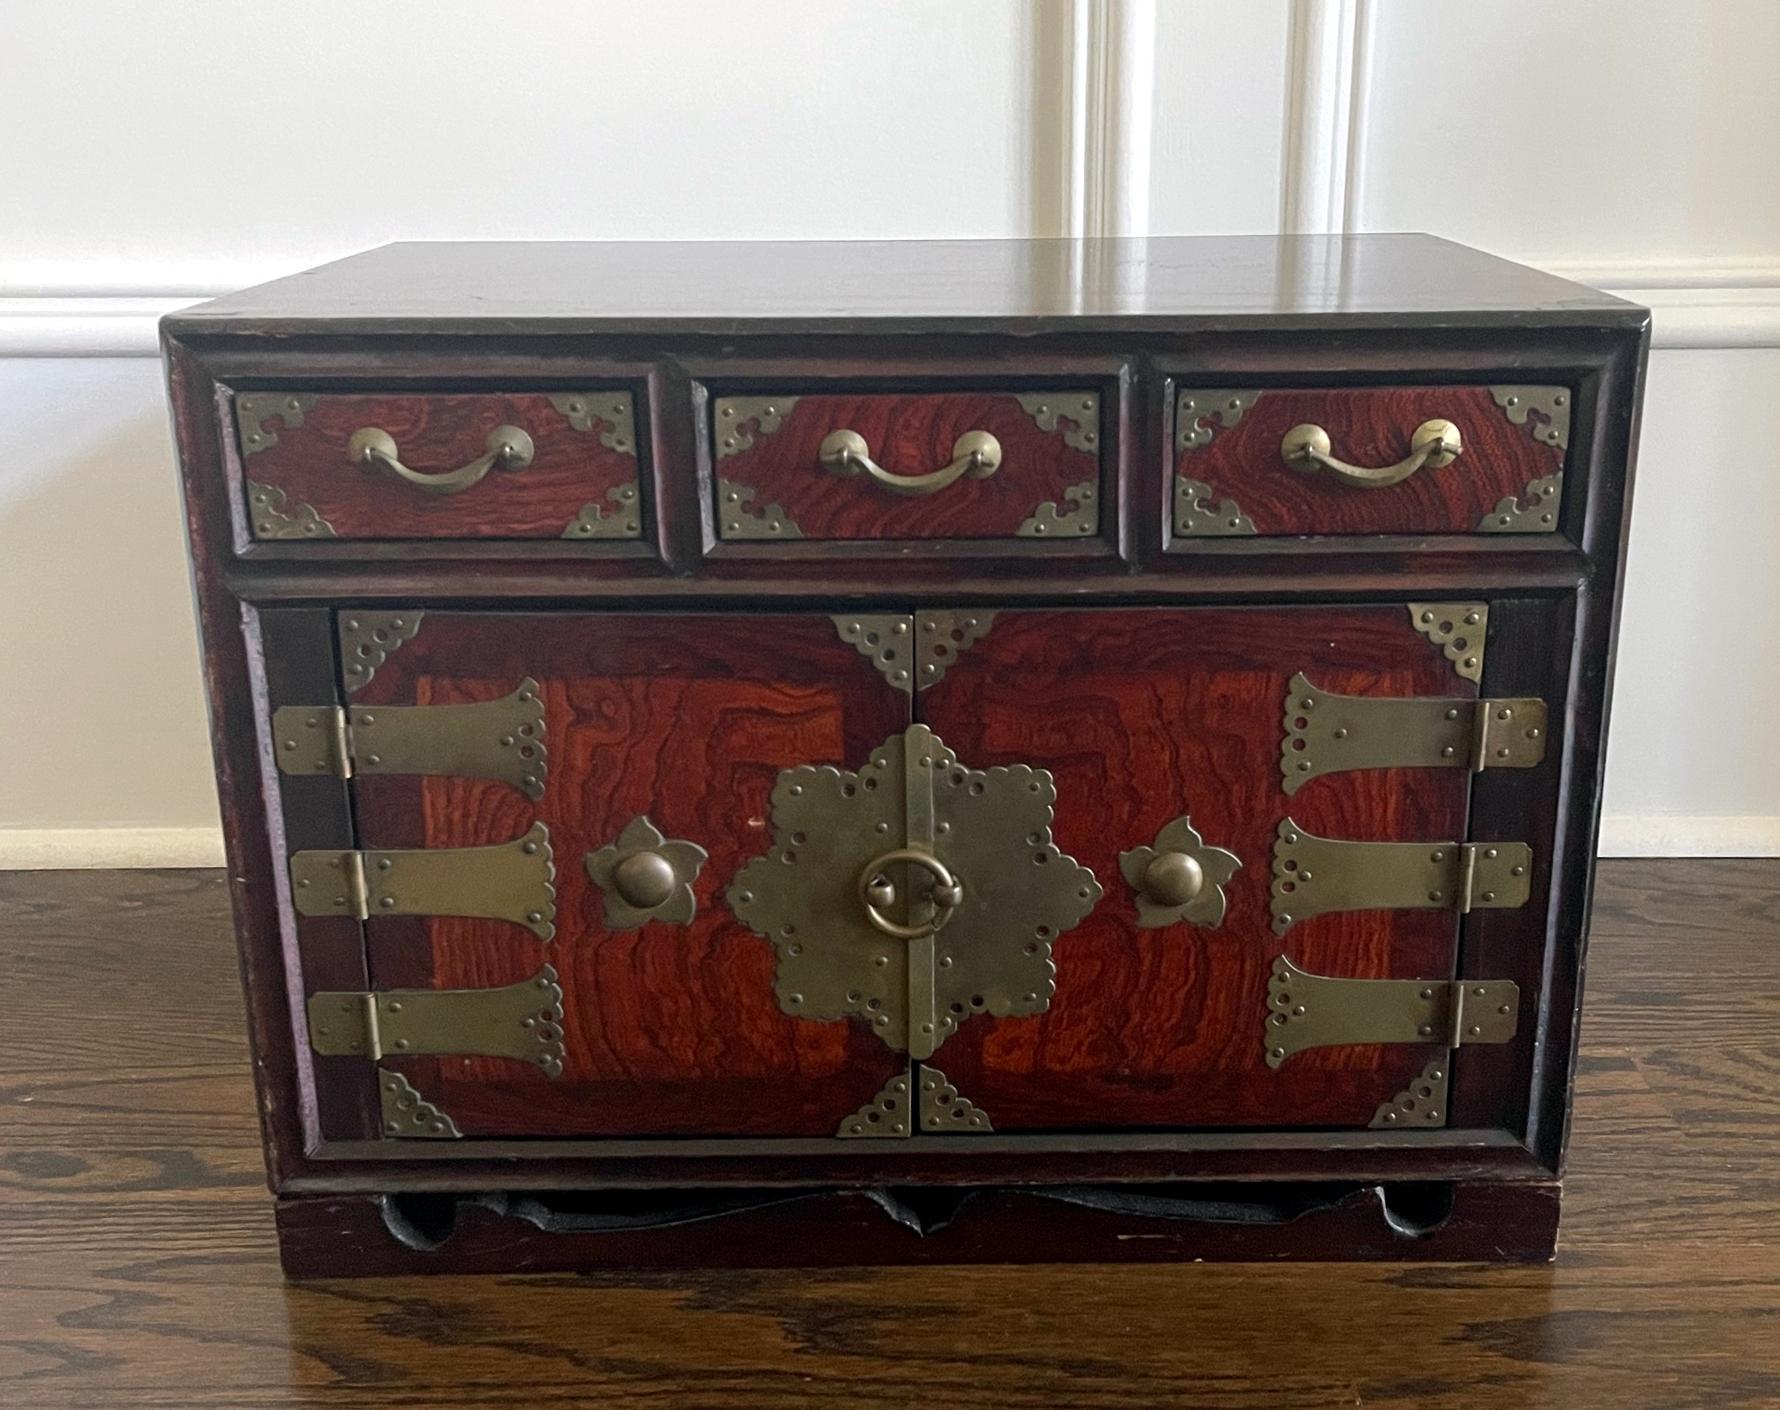 A small Korean mixed wood cabinet dated to Joseon Dynasty circa 19th century. The cabinet was used to keep valuables such as jewelries and money, often placed on the bed functioning as a safe (known in Korean as Gakkesuri). It consists of many